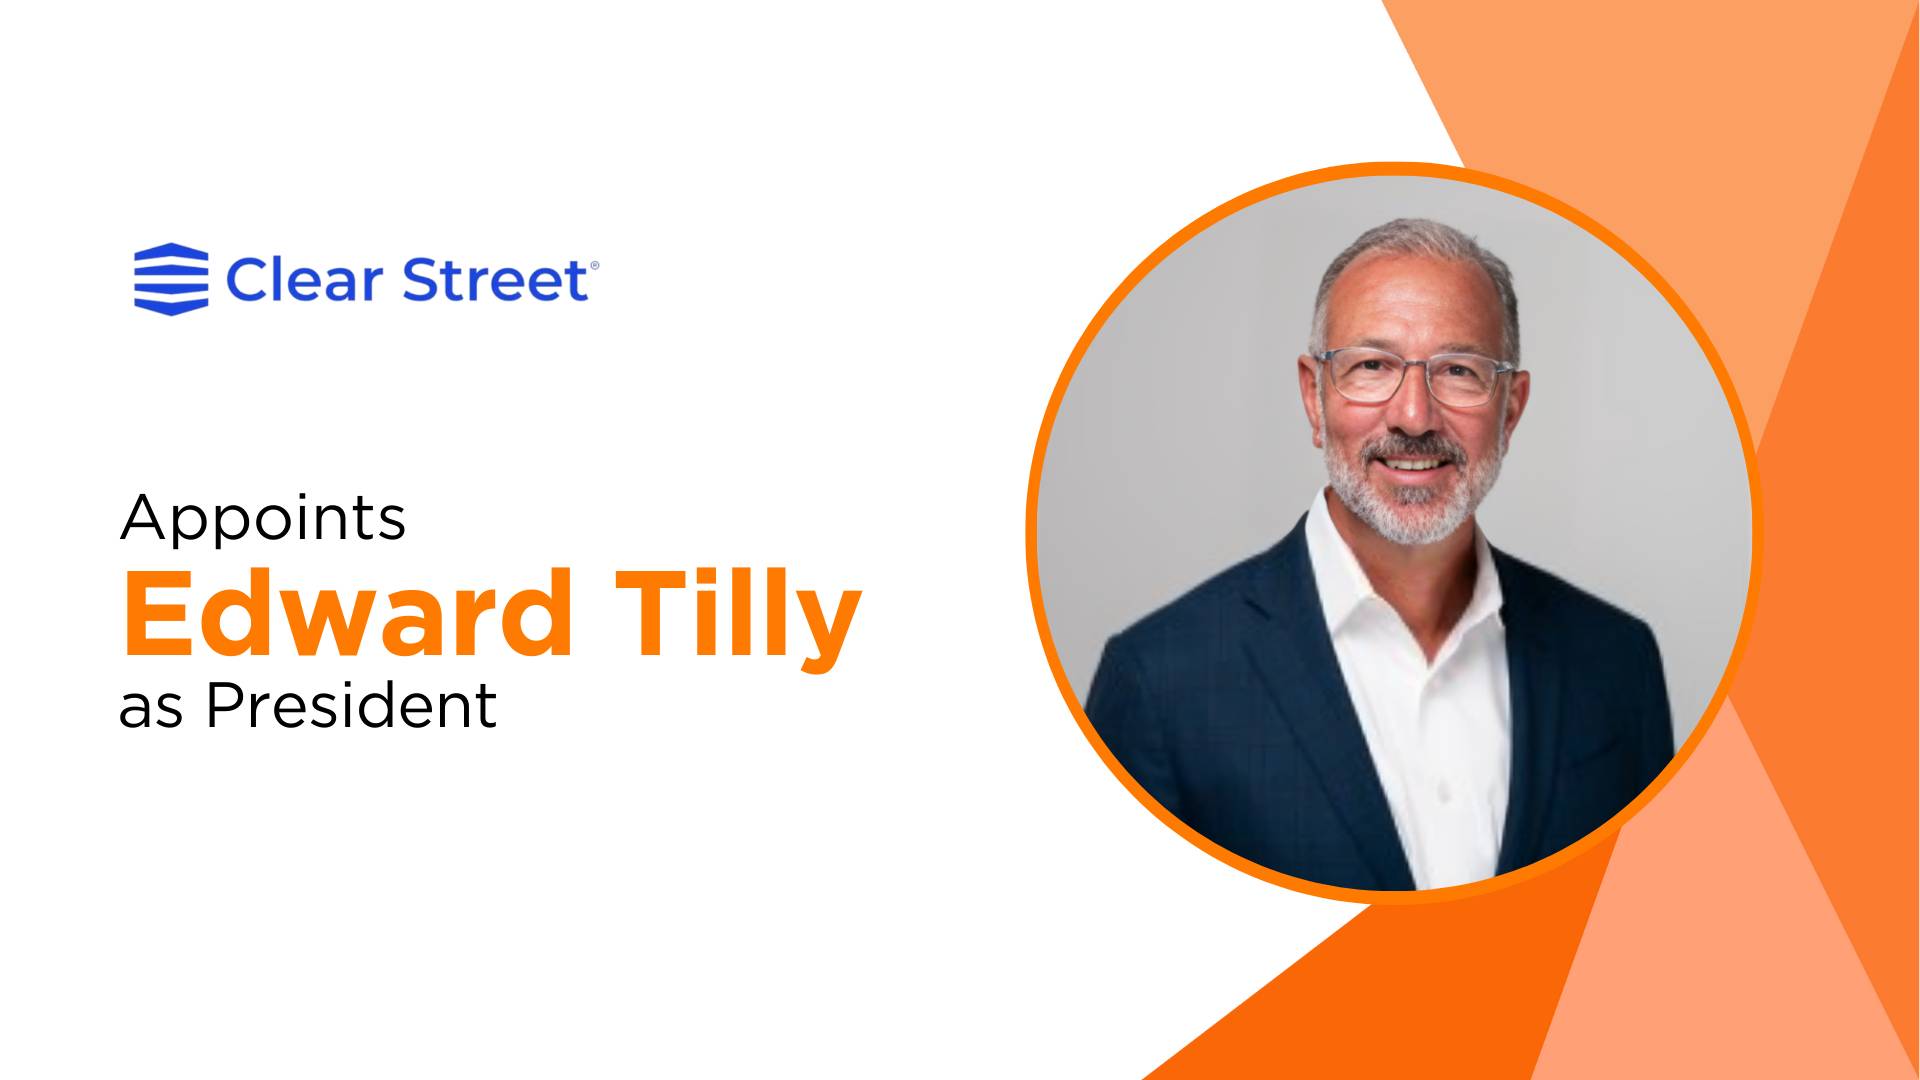 Edward Tilly Joins Clear Street as President to Drive Growth